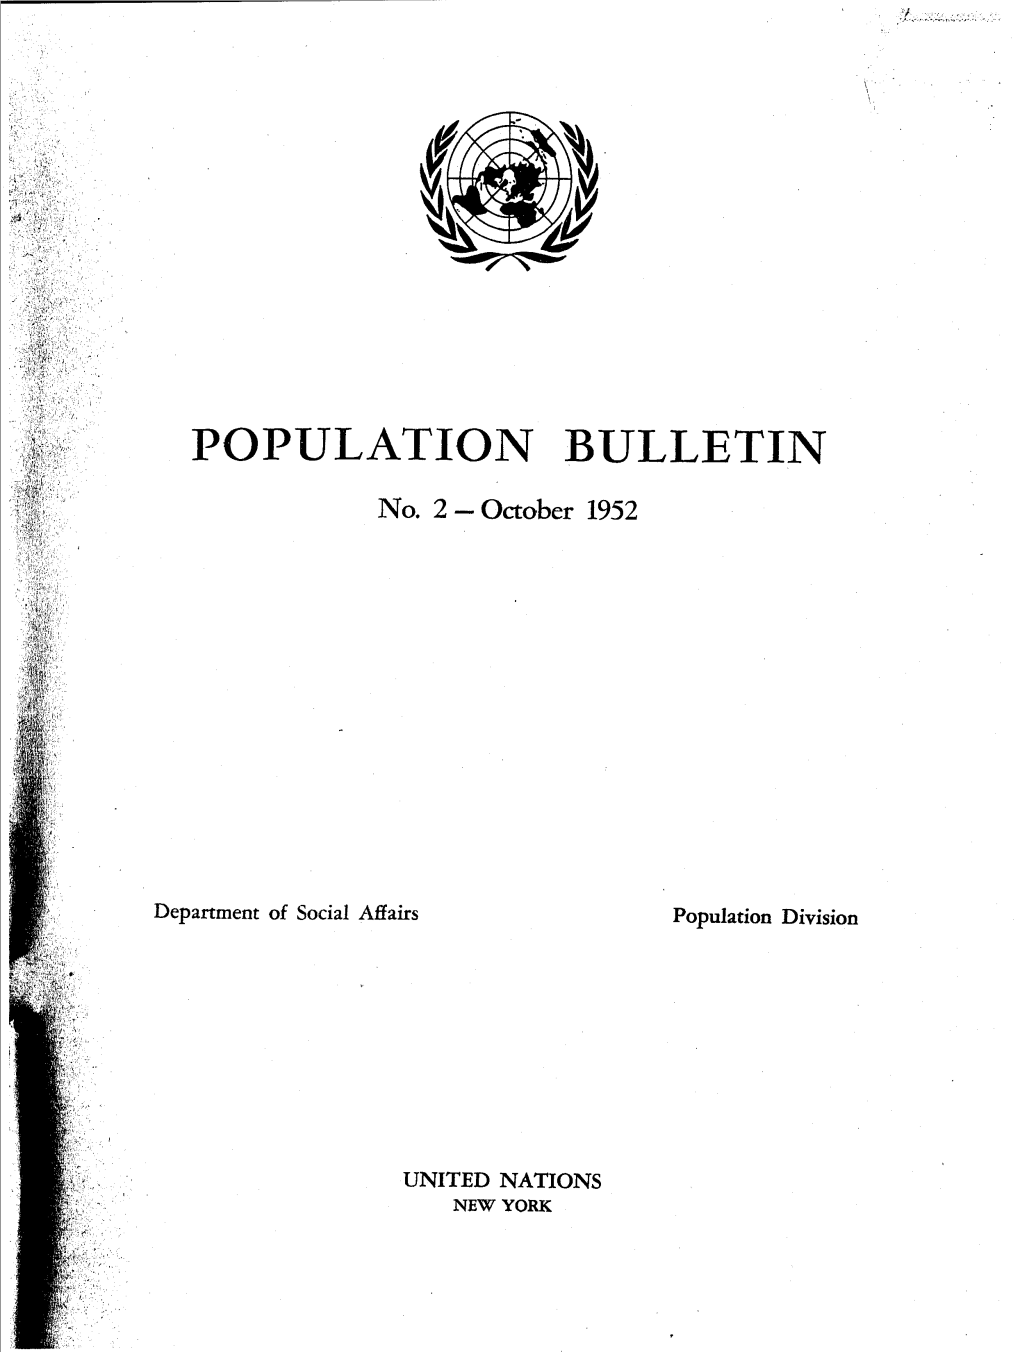 Population Bulletin of the United Nations